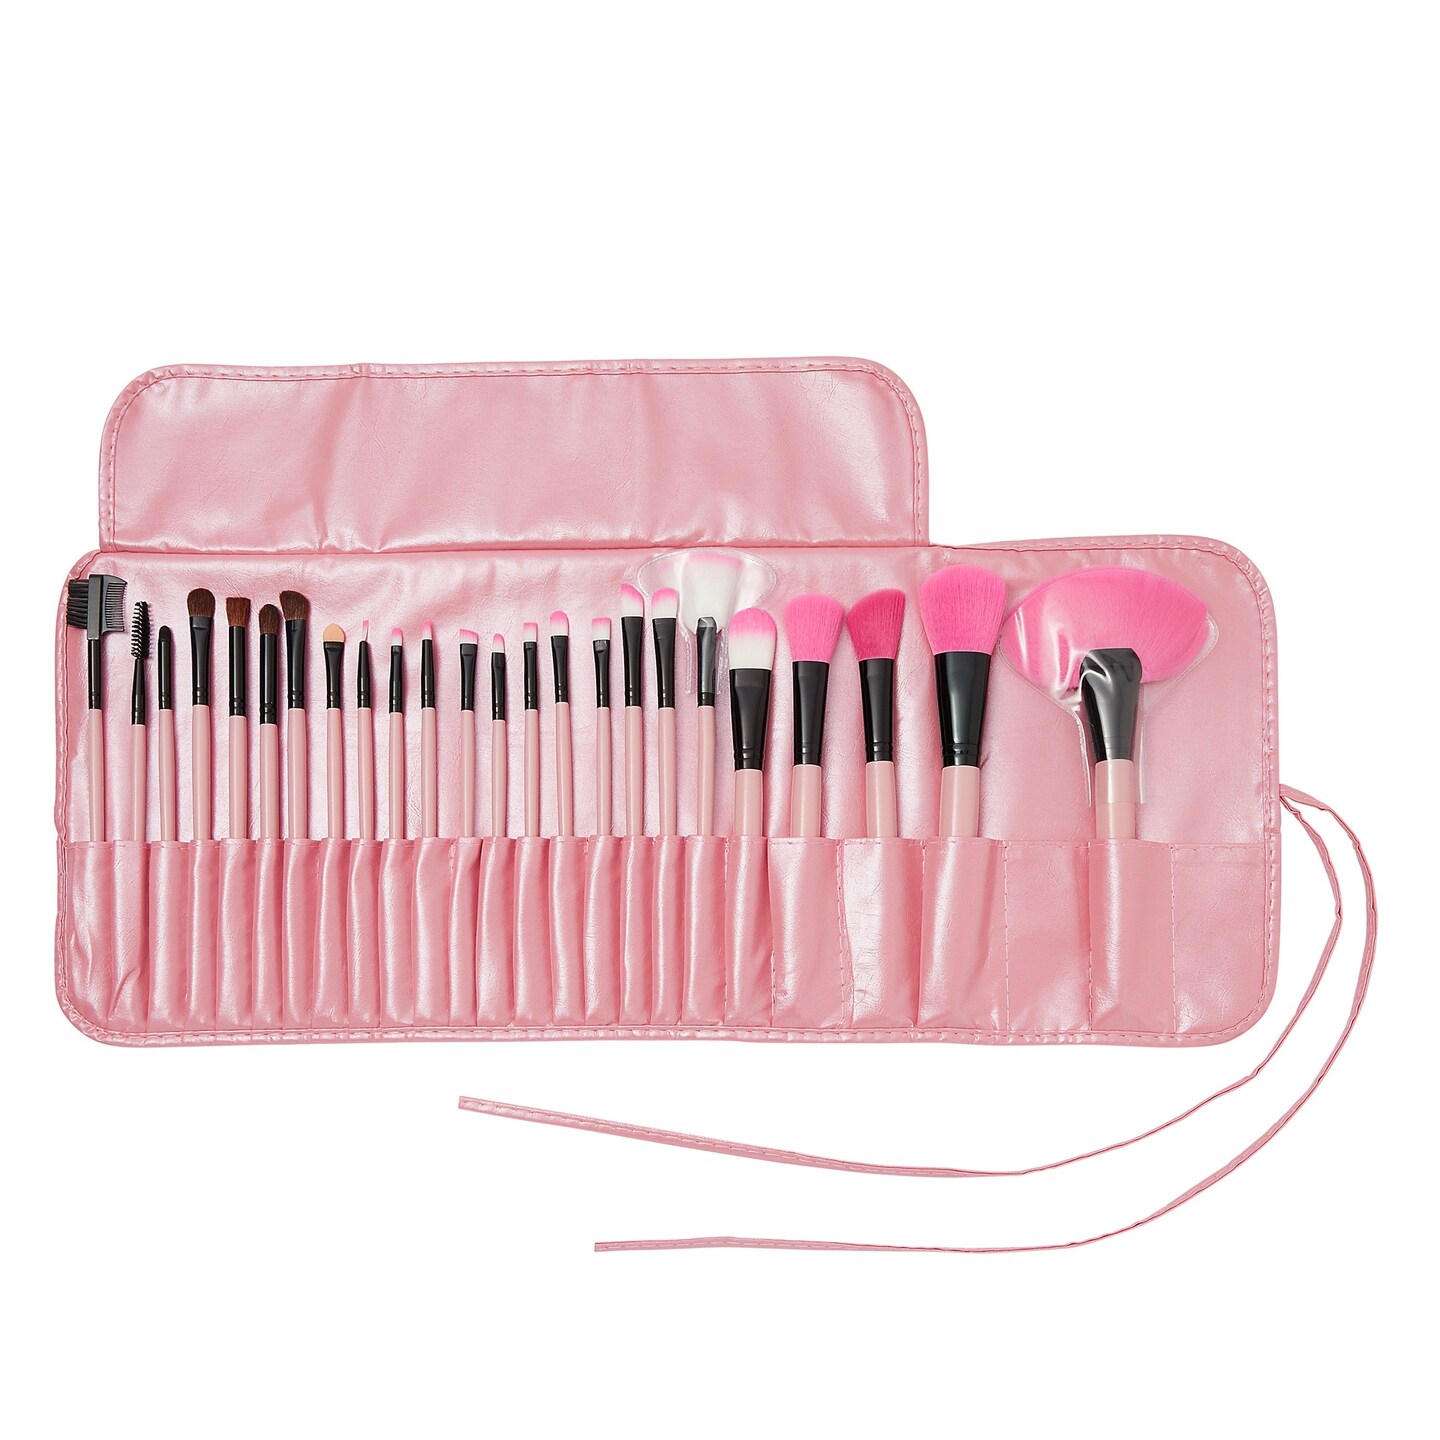 24 Pcs Hot Pink Makeup Brushes Set, Professional Brush Kit for Powder Foundation, Eyeshadow, Eyeliner, Lip, with Cosmetic Pouch Bag